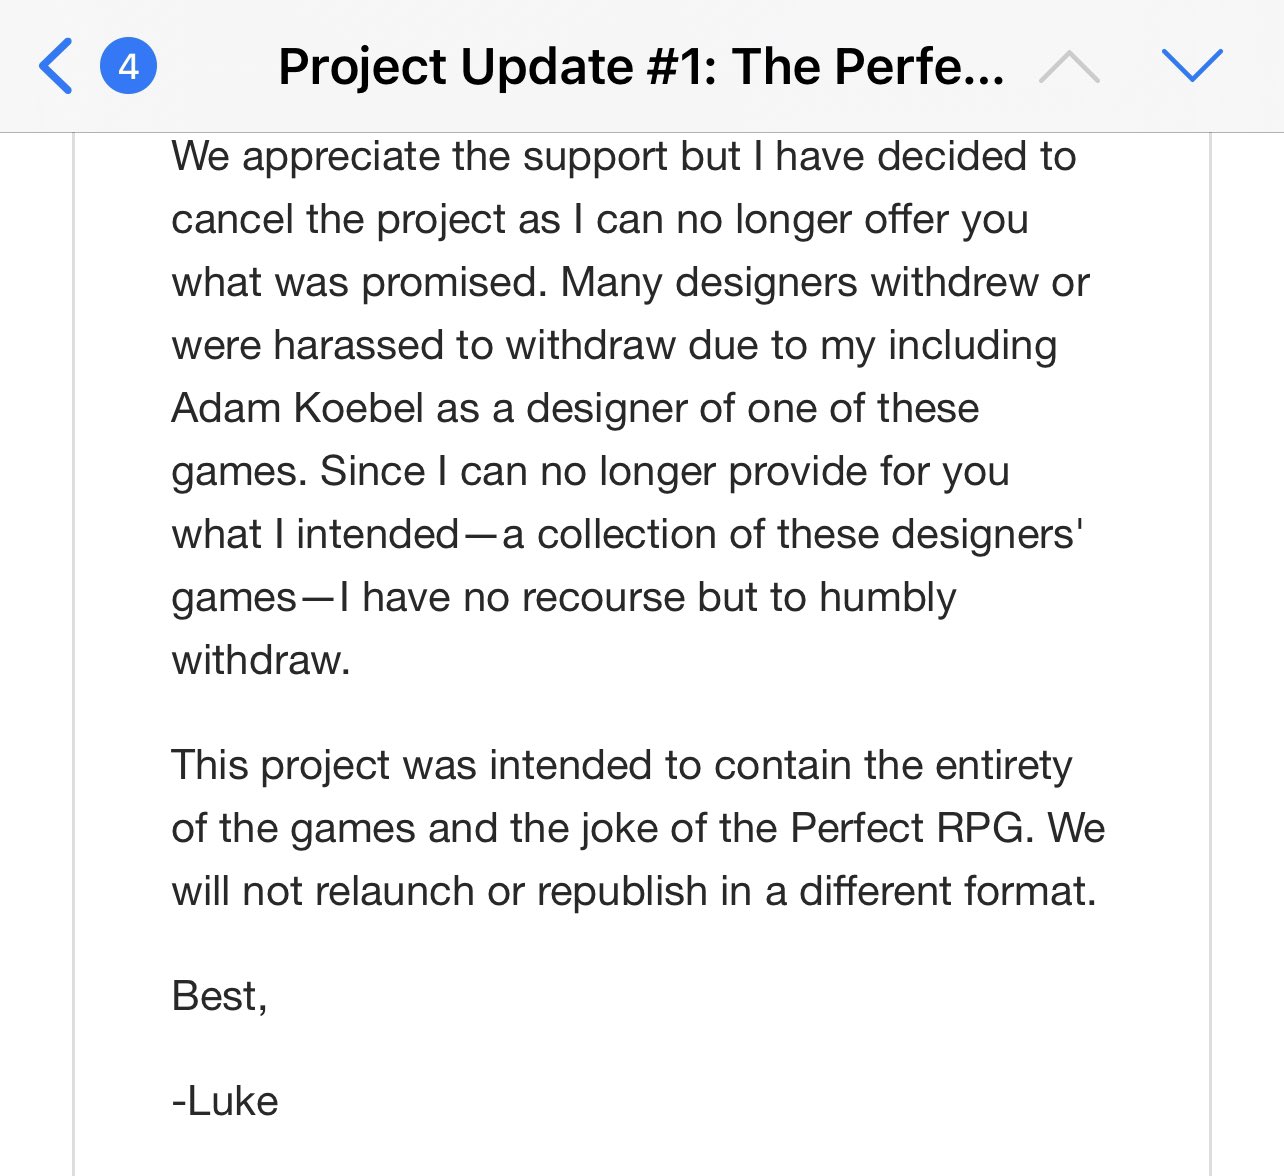 Kickstarter Update cancelling the project